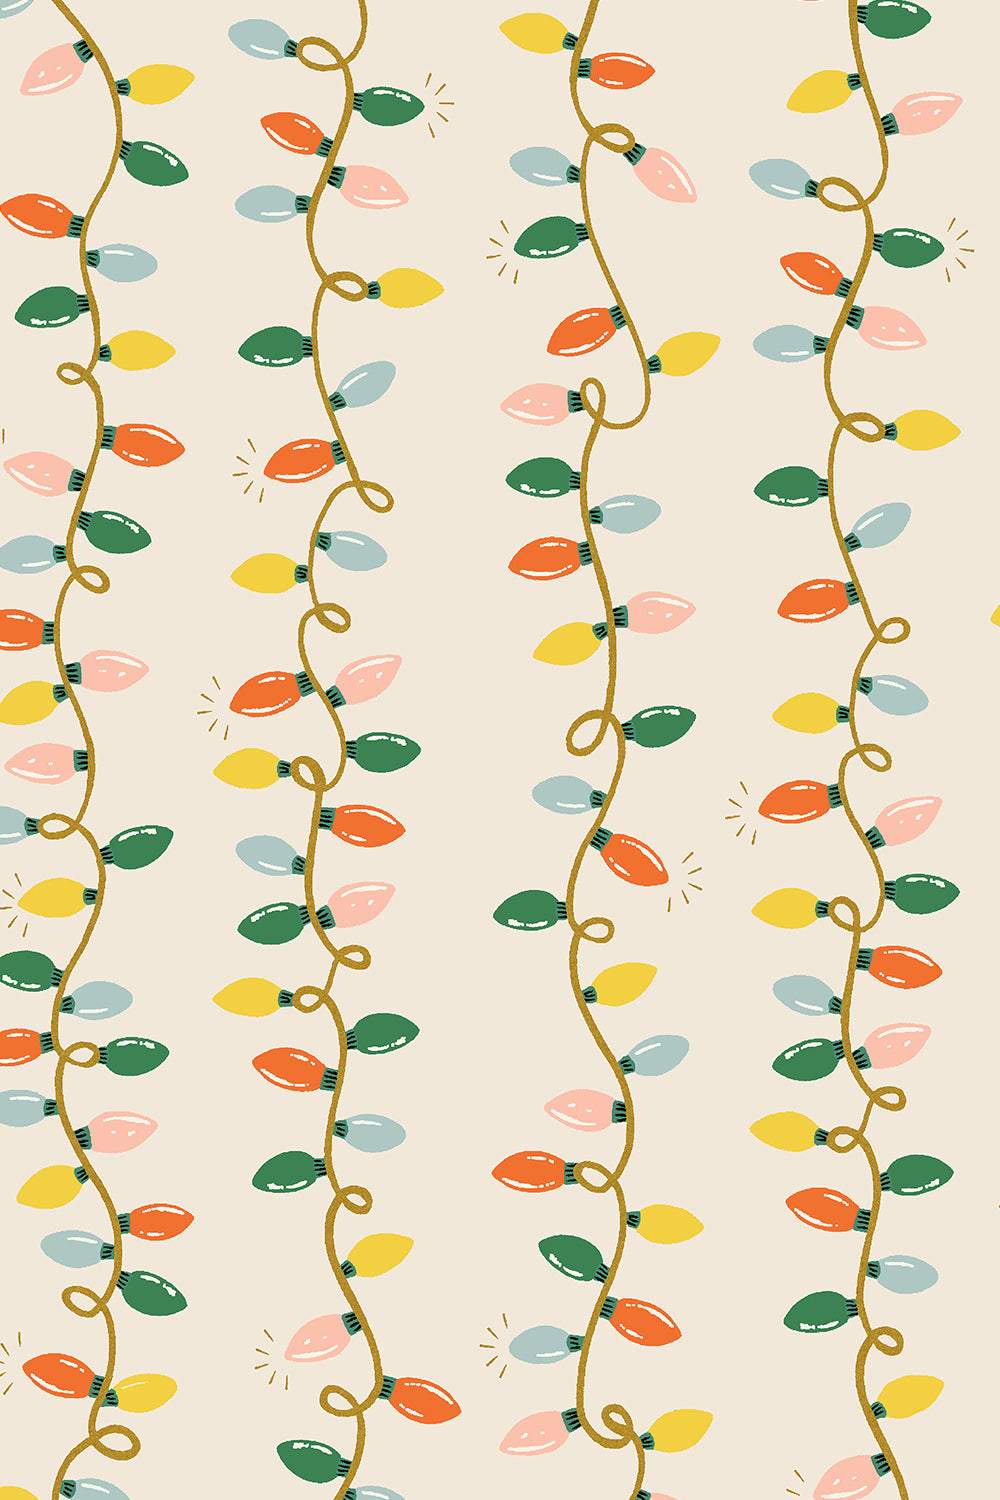 Holiday Classics Holiday Lights By Rifle Paper Co. For Cotton + Steel Cream / Metallic